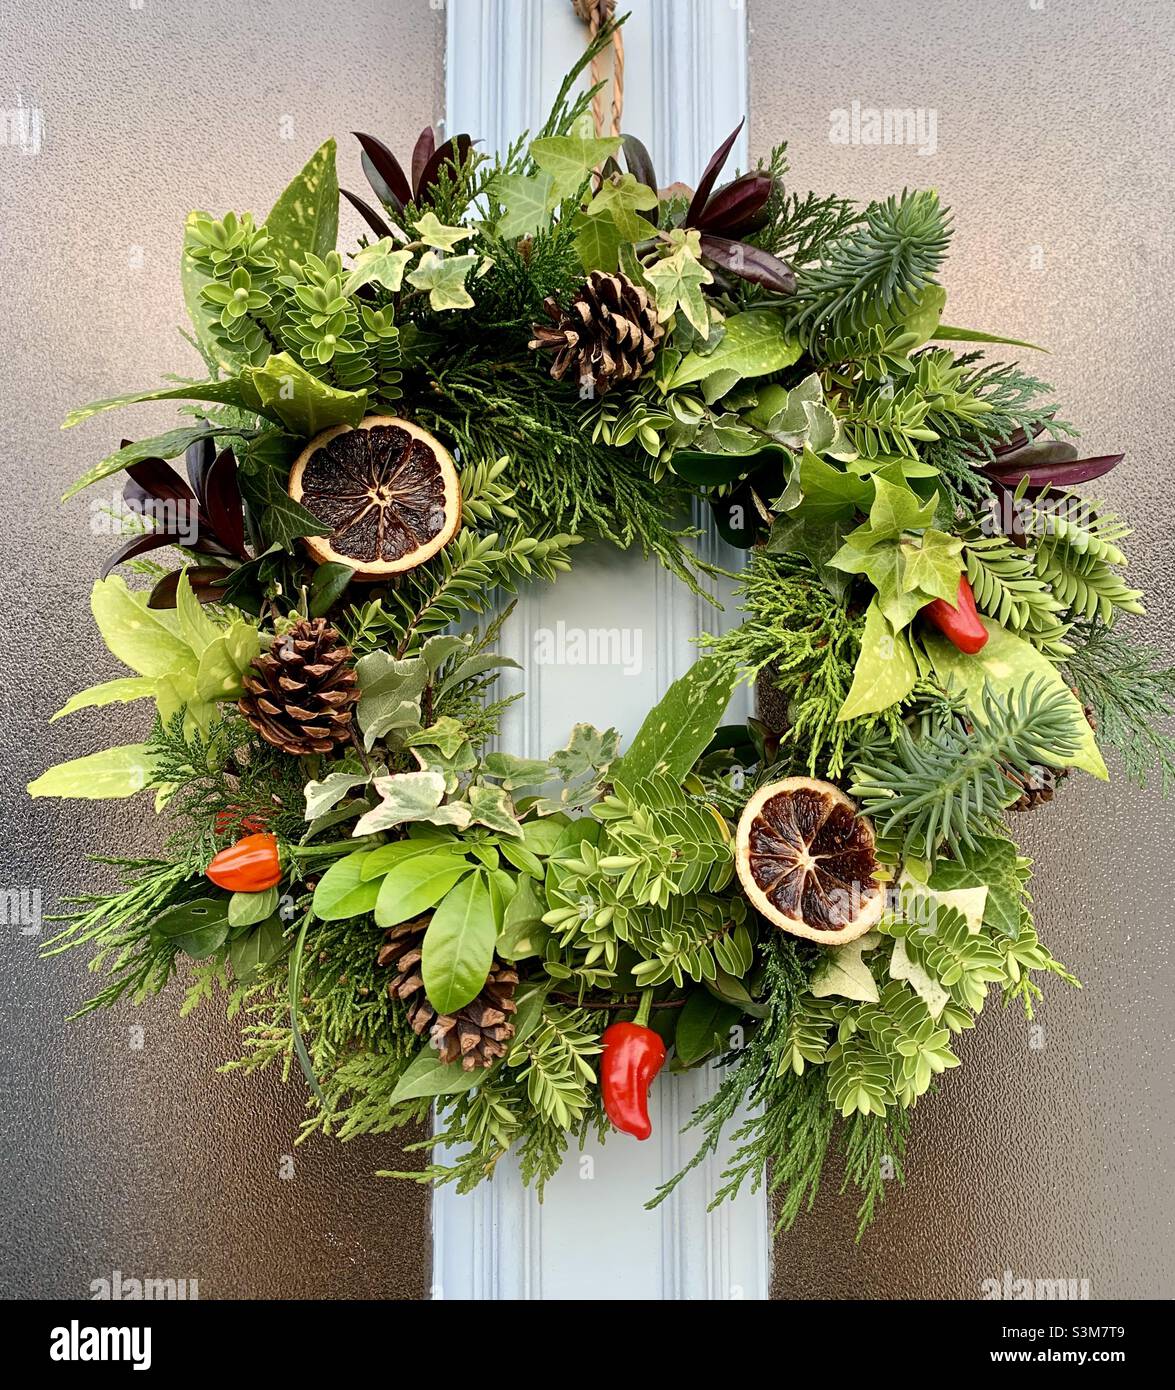 Homemade Christmas wreath with chillis and oranges on front door Stock Photo